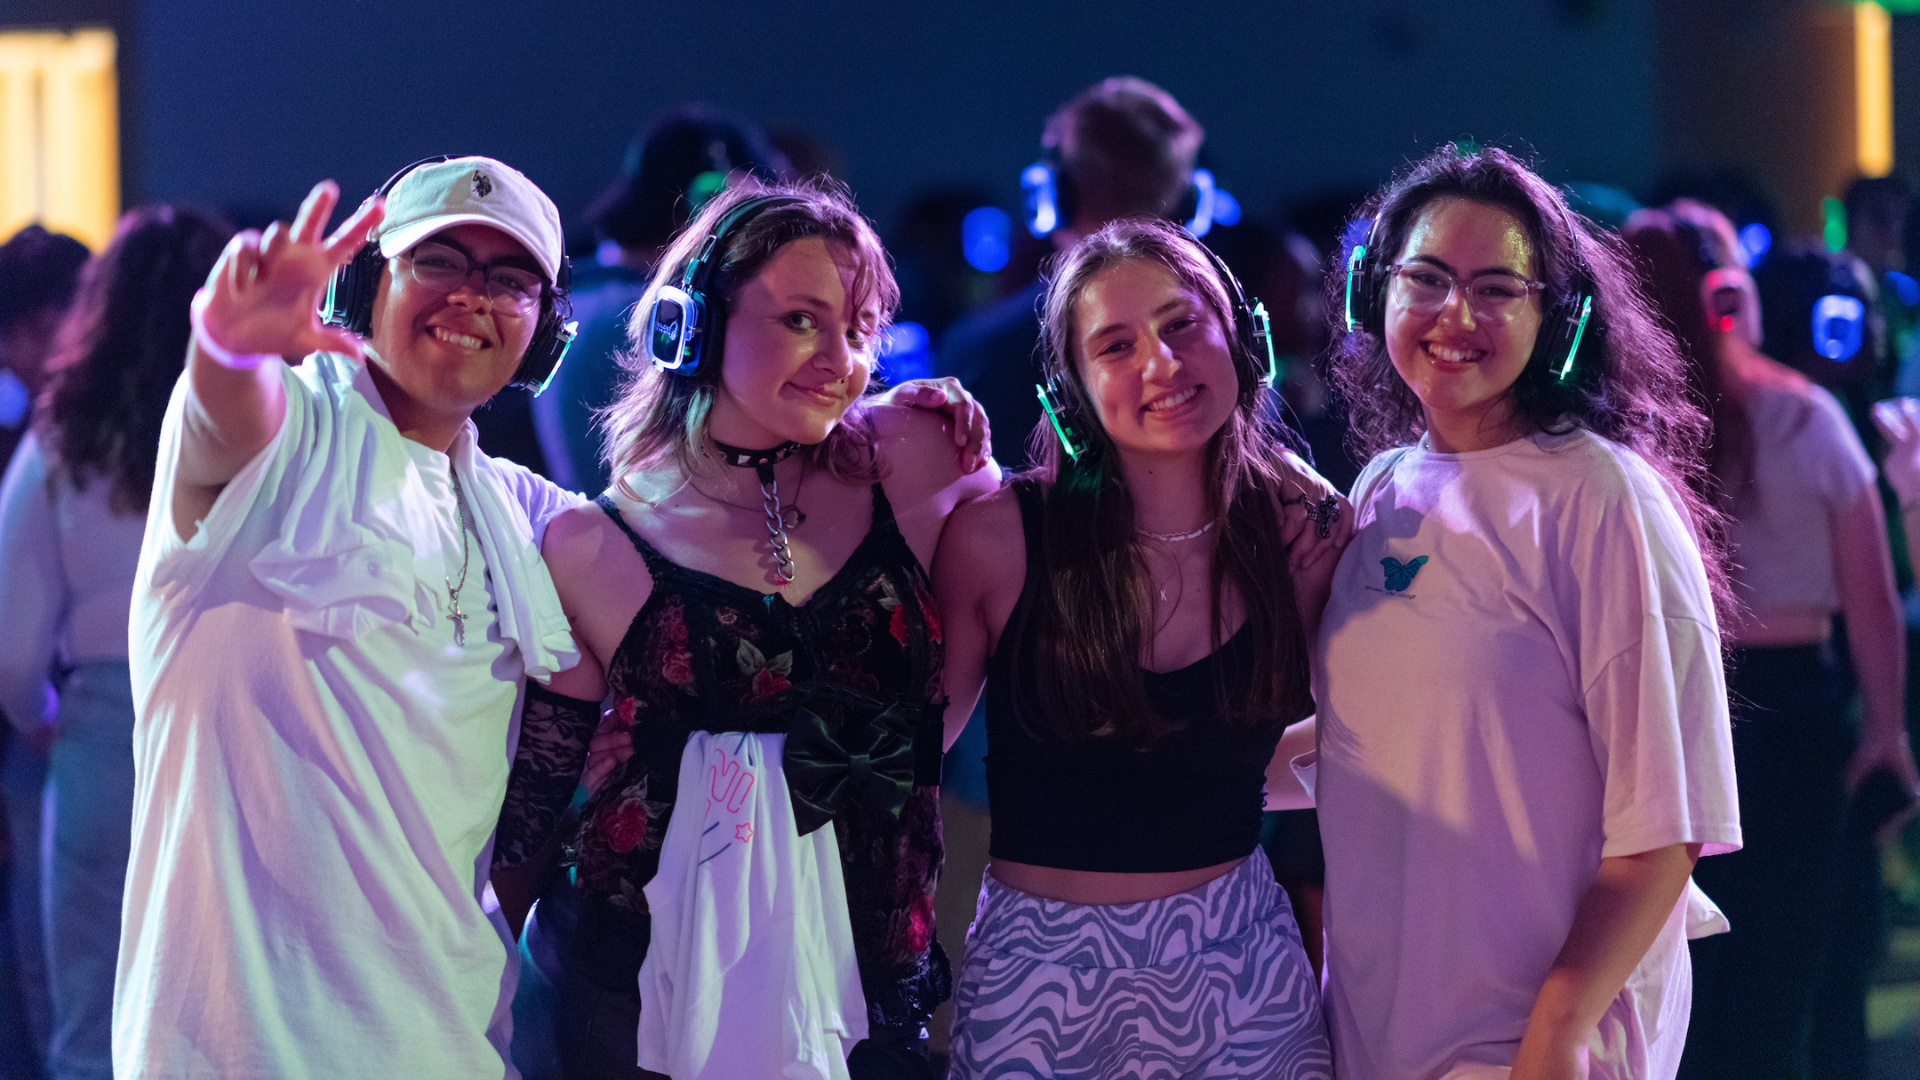 Students smiling and posing for a photo, at Silent Disco, wearing headphones